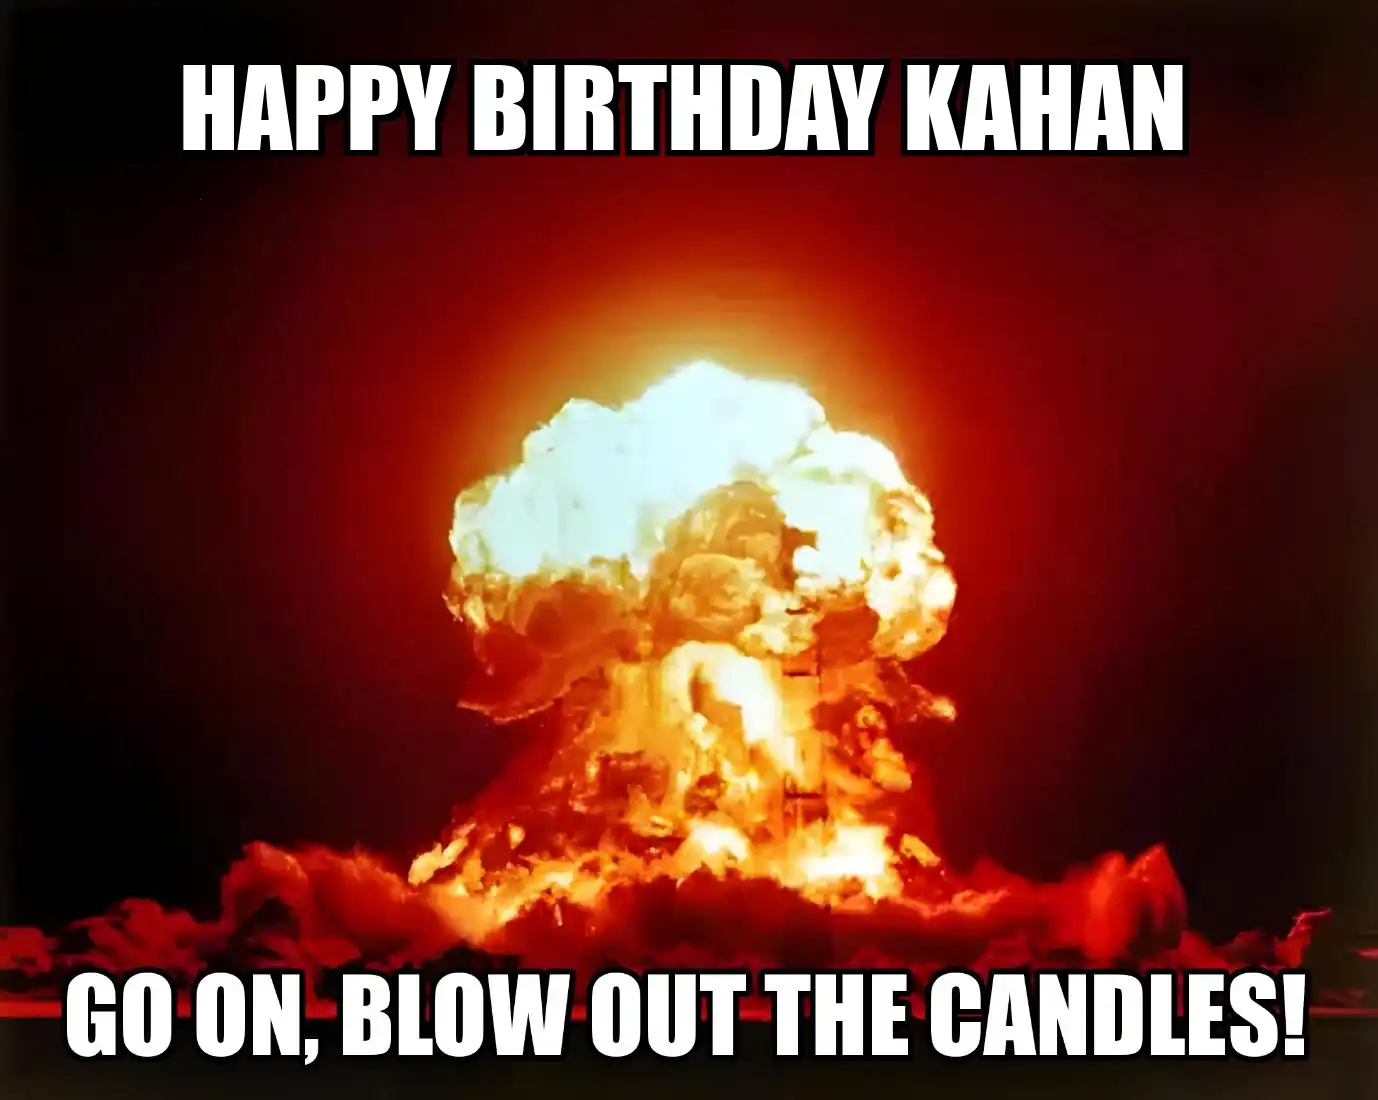 Happy Birthday Kahan Go On Blow Out The Candles Meme